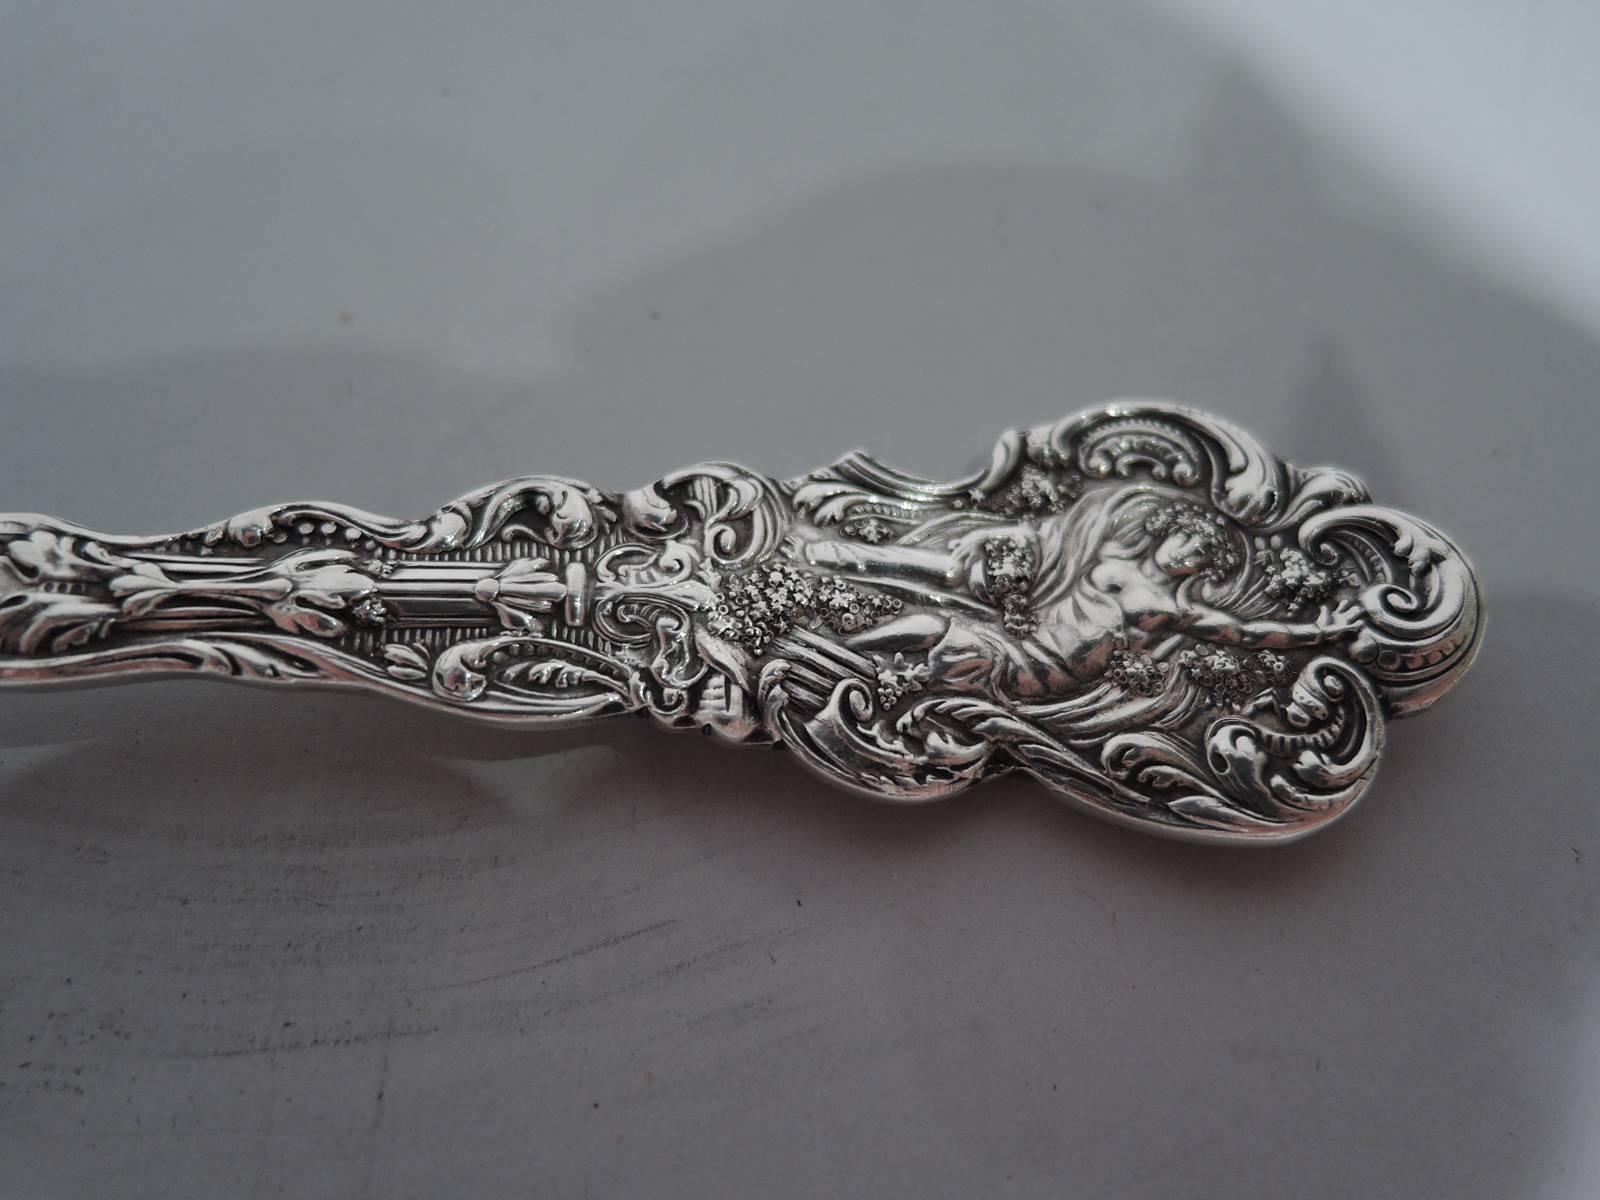 Sterling silver tomato server in Versailles pattern. Made by Gorham in Providence. Scrolled terminal with Classical Baroque figure and ornament. Circular blade with ornamental piercing. A really nice serving piece in this historic pattern, which was